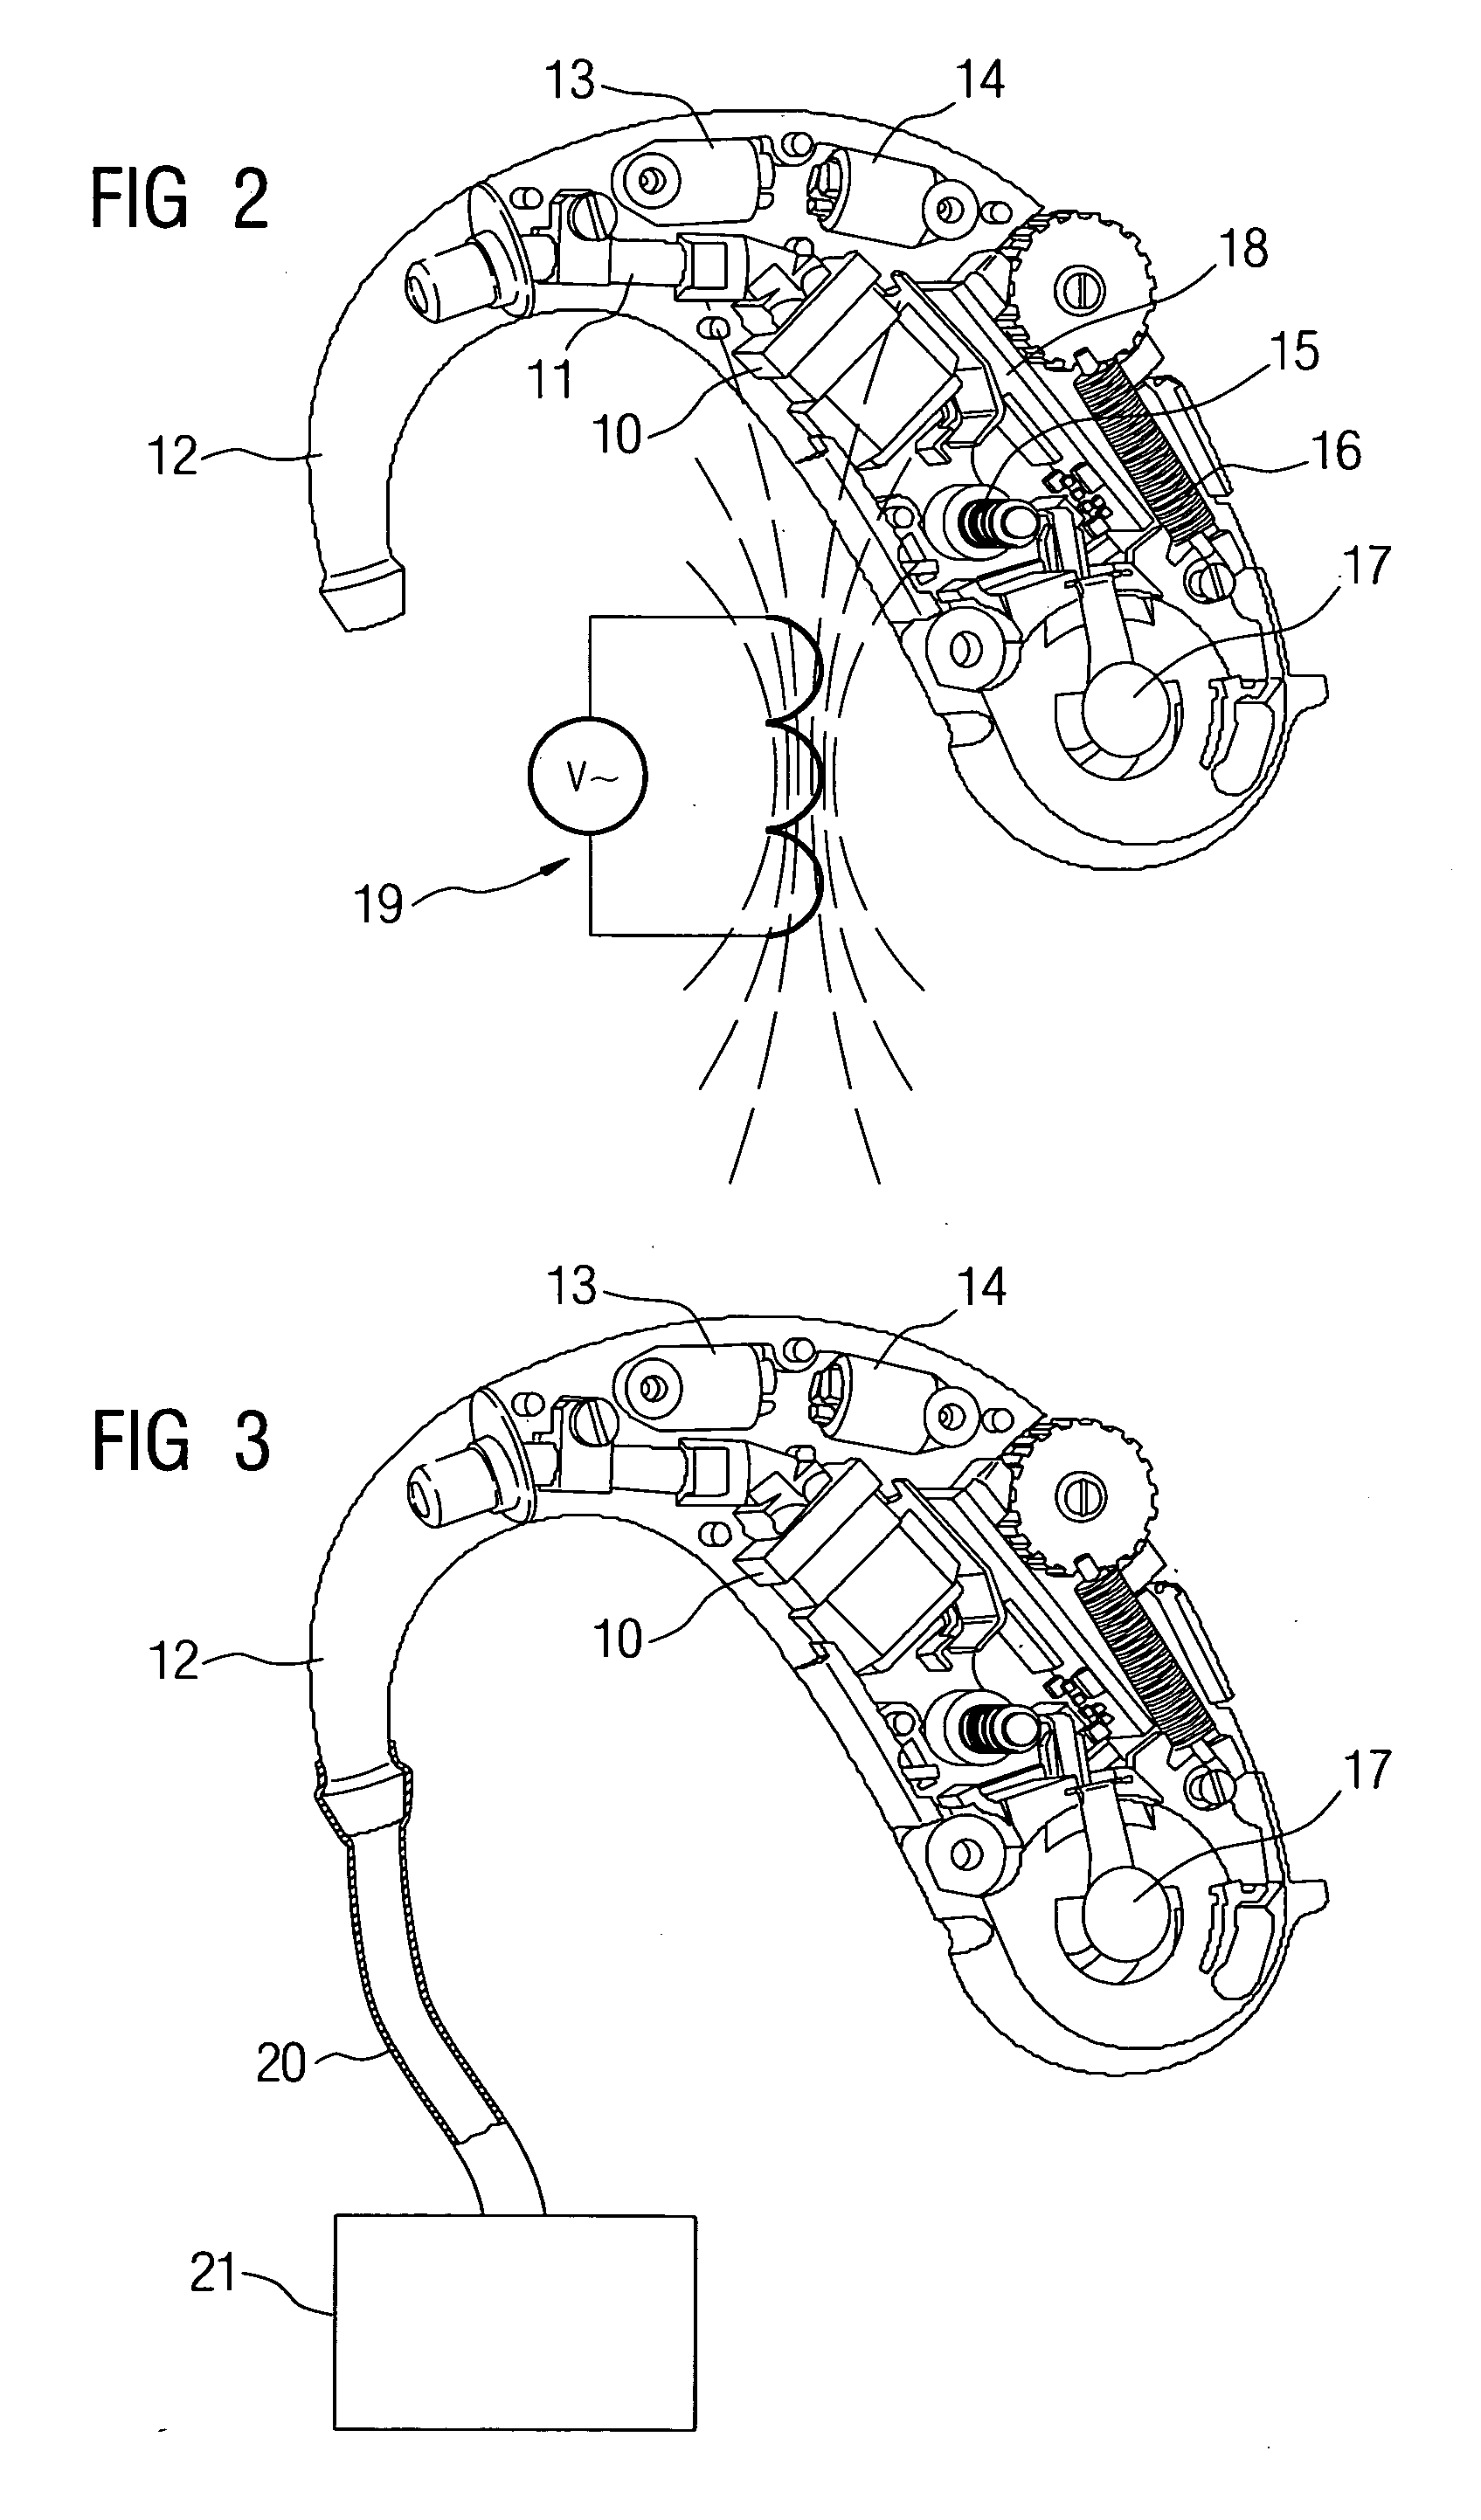 Hearing apparatus with a special energy acceptance system and corresponding method